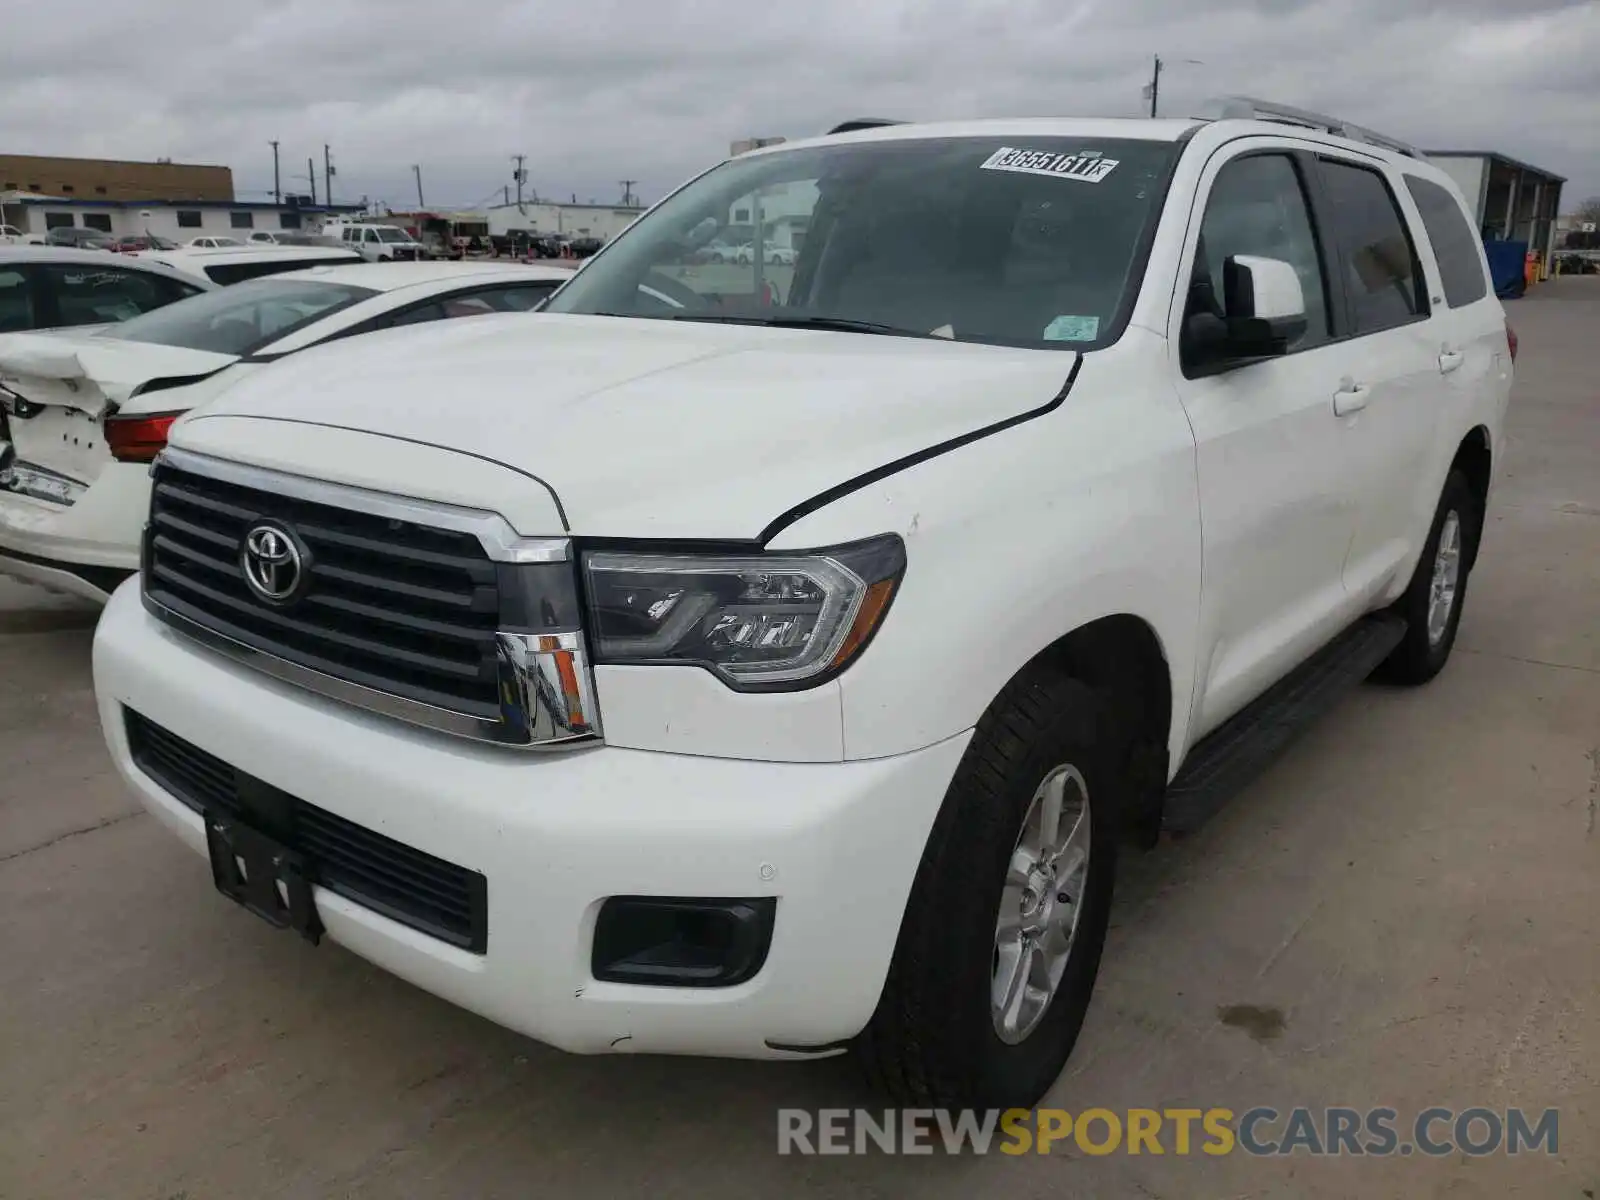 2 Photograph of a damaged car 5TDBY5G18KS170068 TOYOTA SEQUOIA 2019